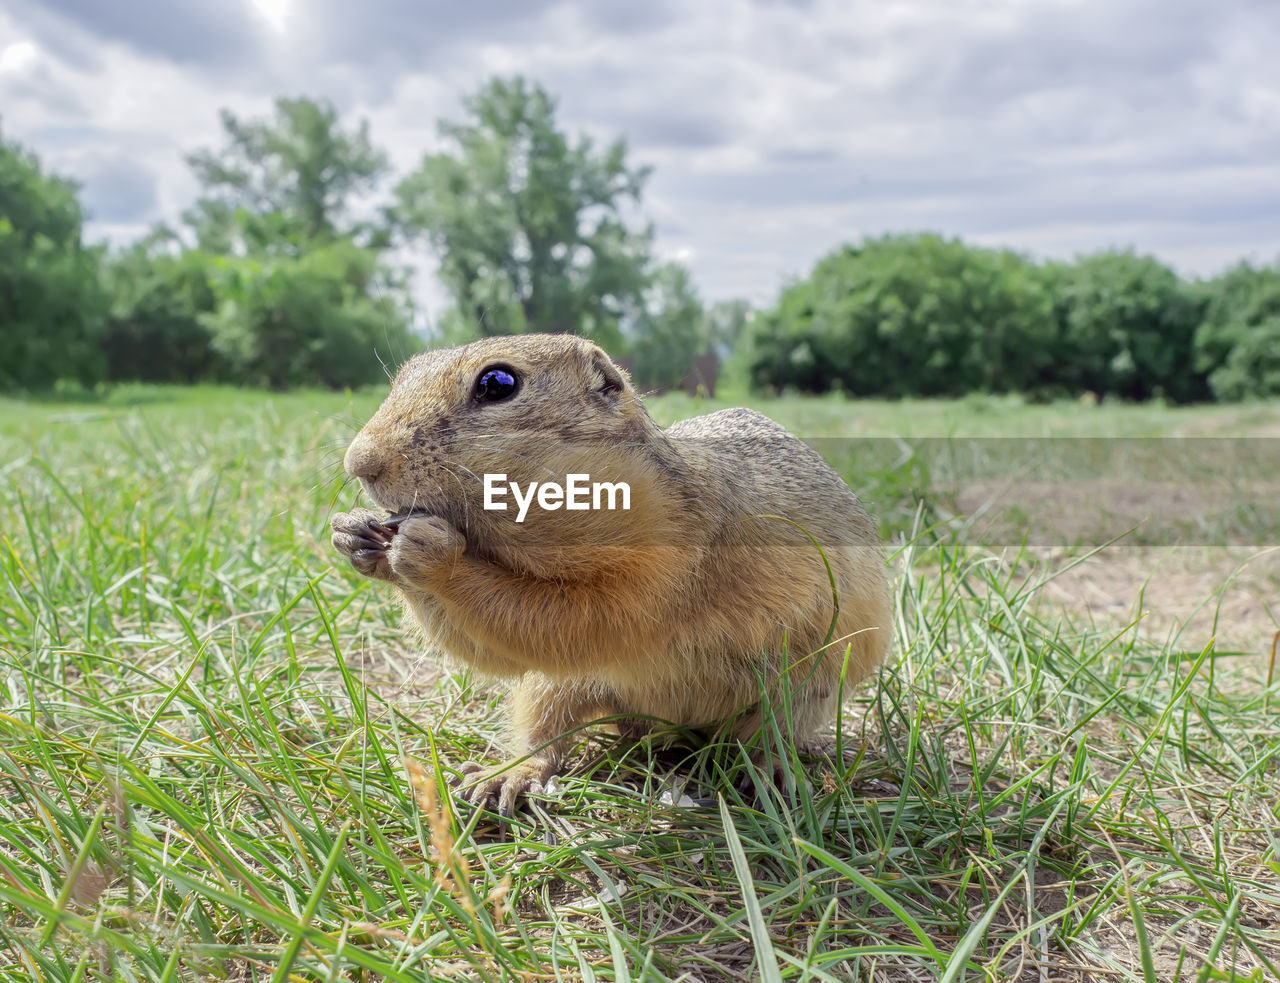 animal themes, animal, one animal, animal wildlife, mammal, grass, plant, rodent, wildlife, nature, prairie, squirrel, no people, land, field, sky, eating, pet, day, cloud, prairie dog, outdoors, close-up, grassland, focus on foreground, whiskers, green, food